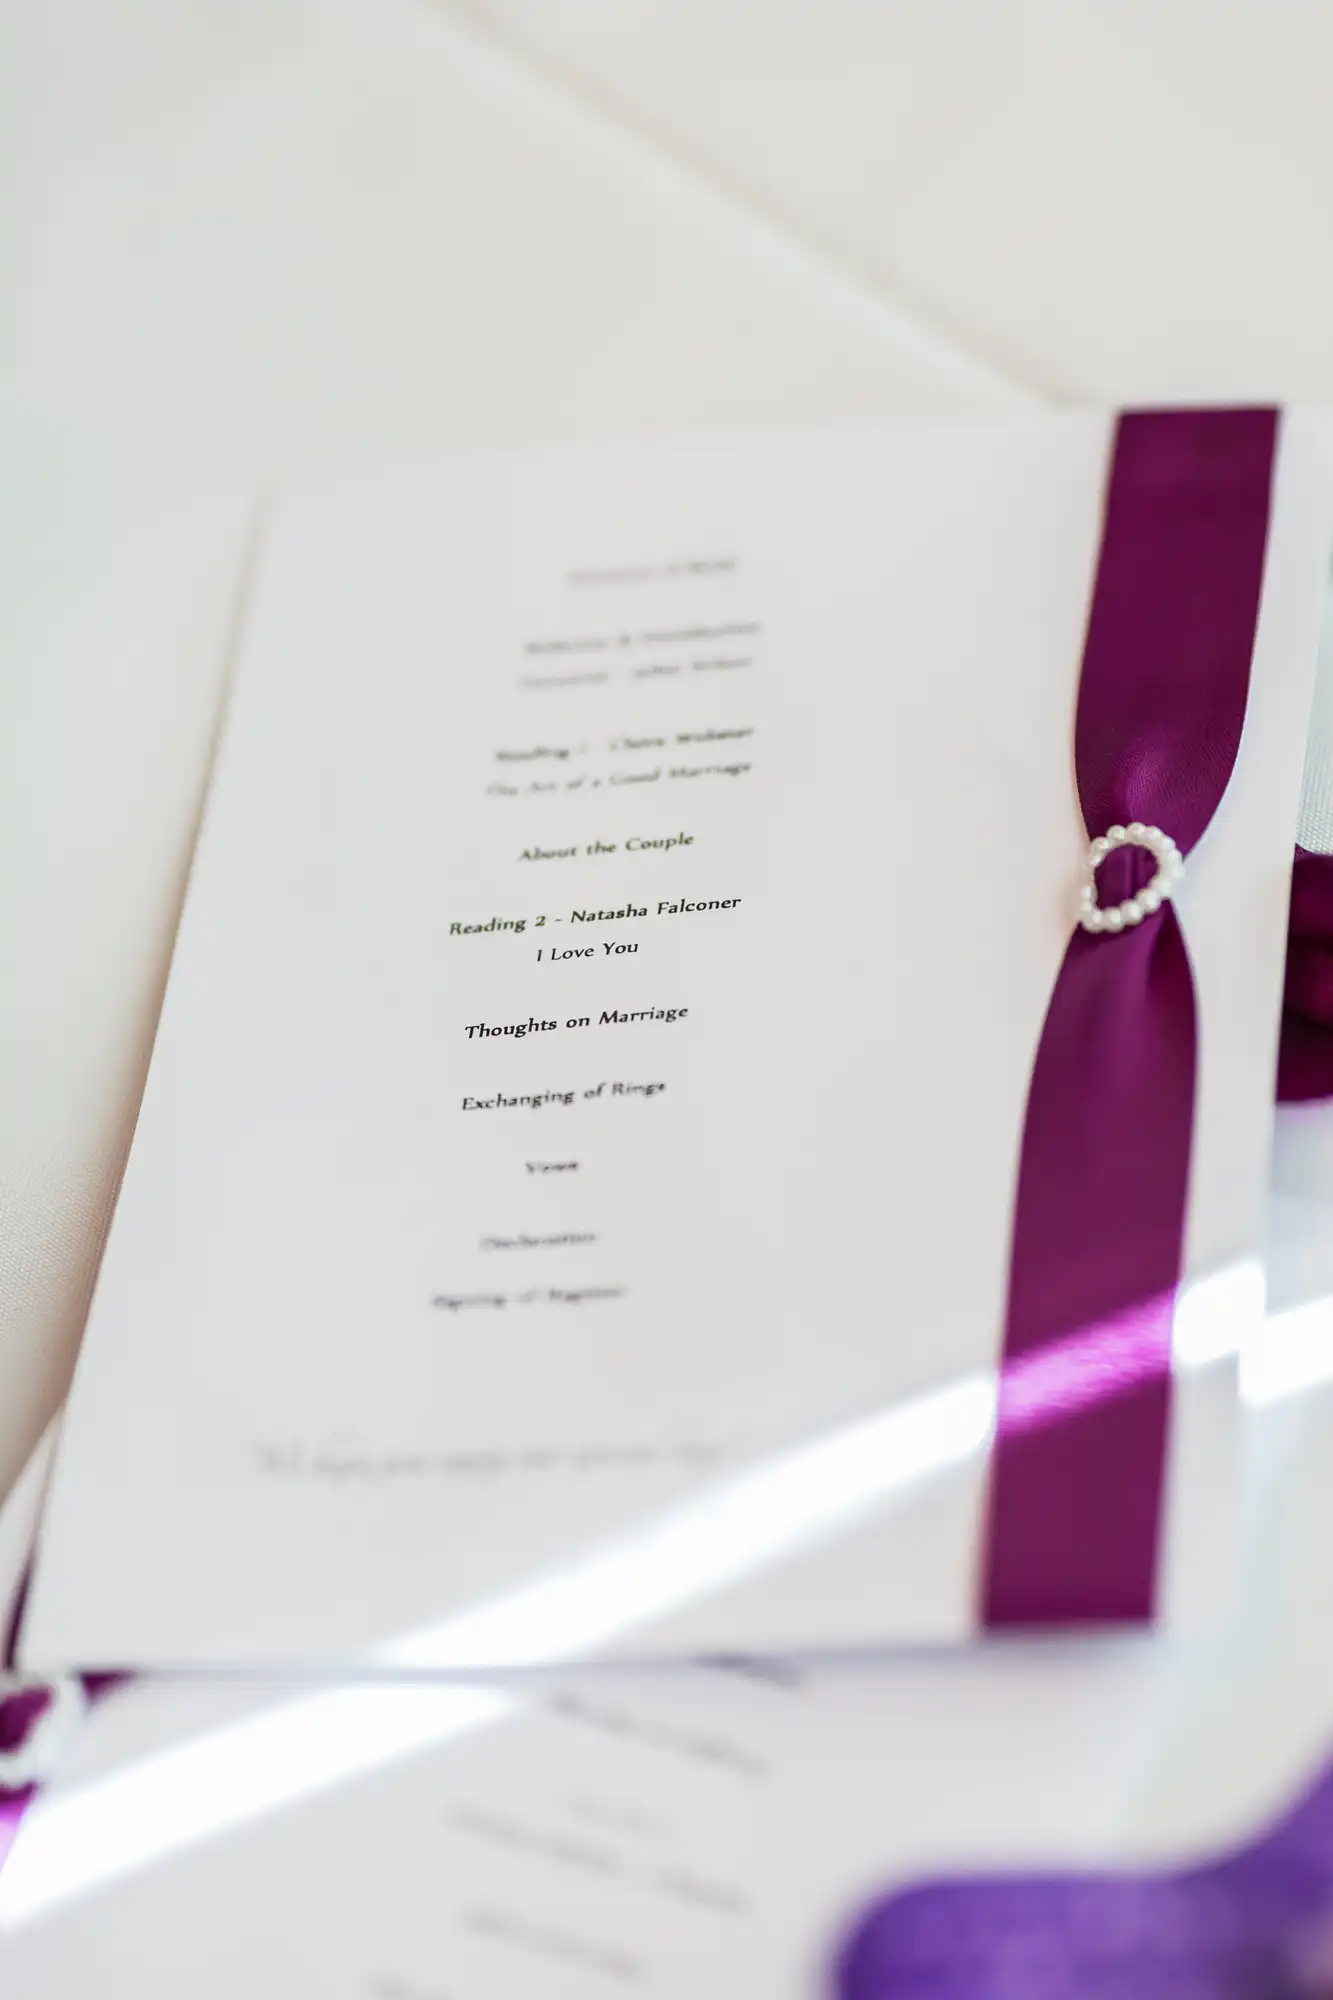 A close-up of a wedding program tied with a purple ribbon, featuring a section titled "thoughts on marriage.